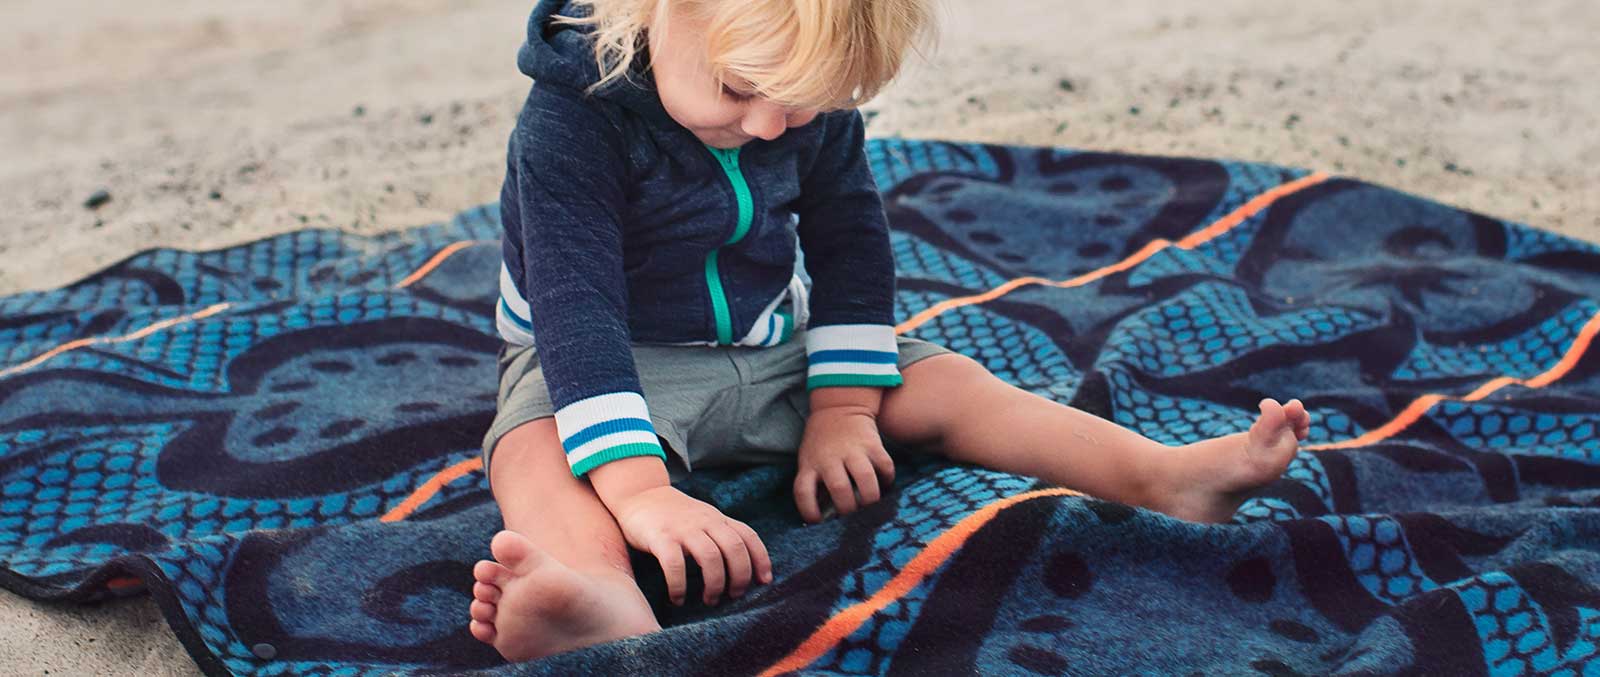 The basotho blanket on a beach with a small toddle on it 